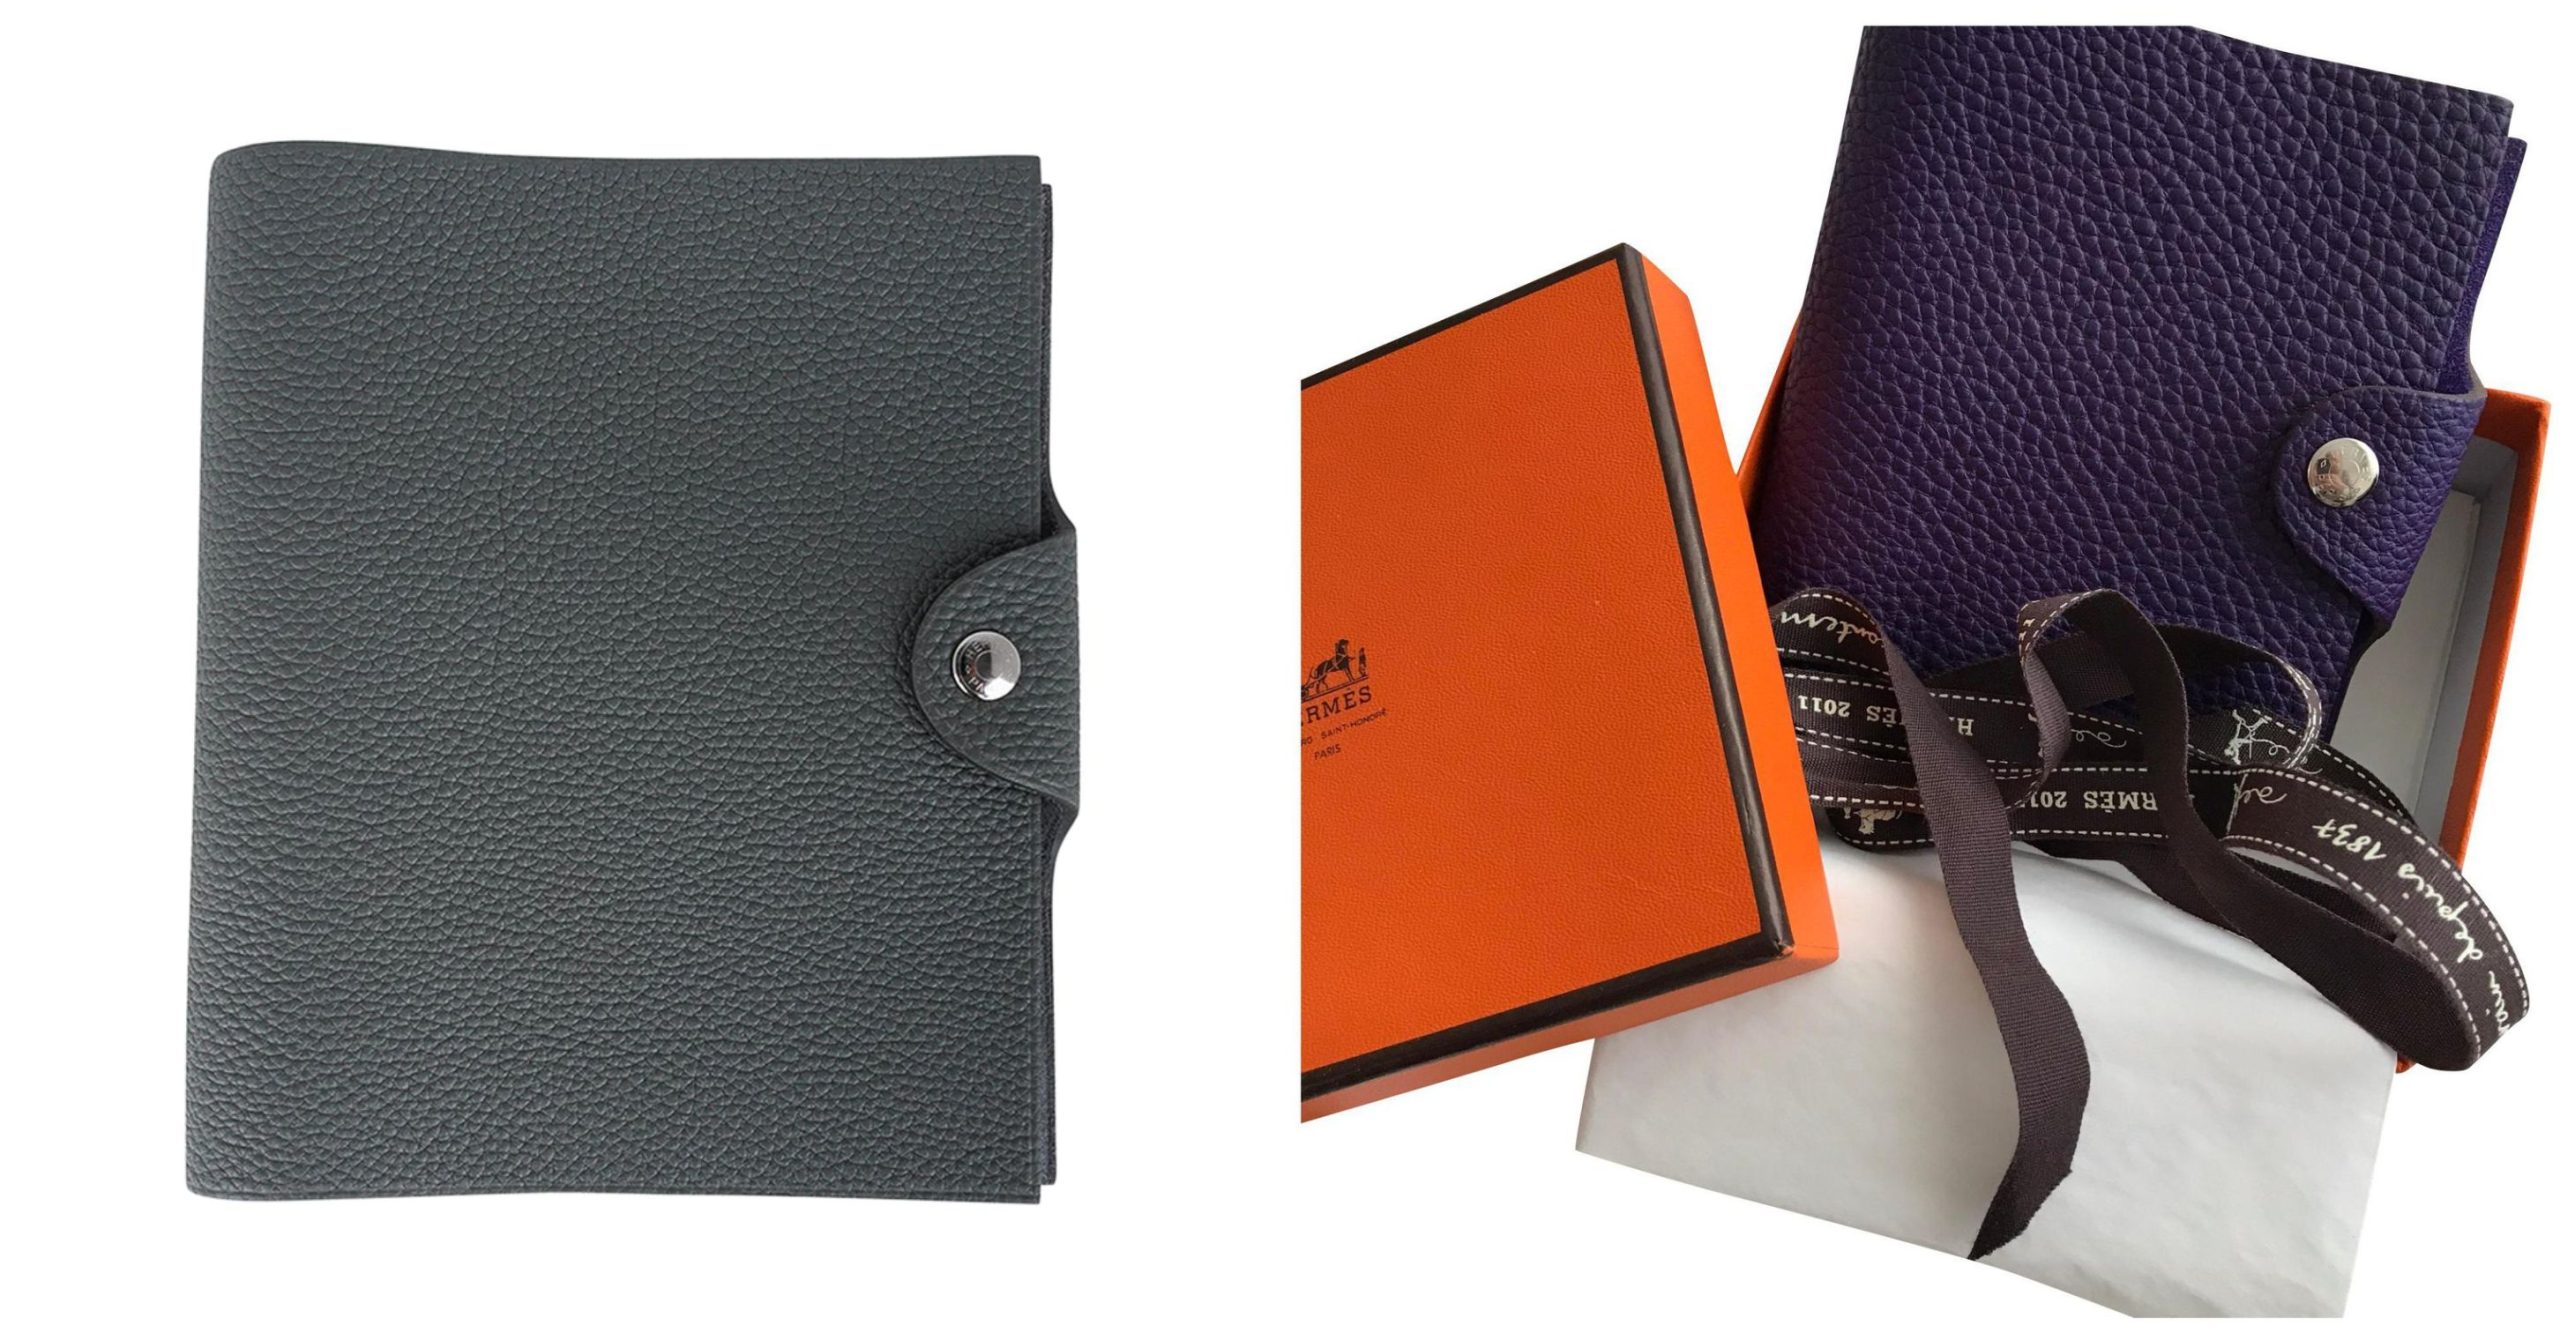 High Quality HERMES Leather Wallet for Men in Magodo - Bags